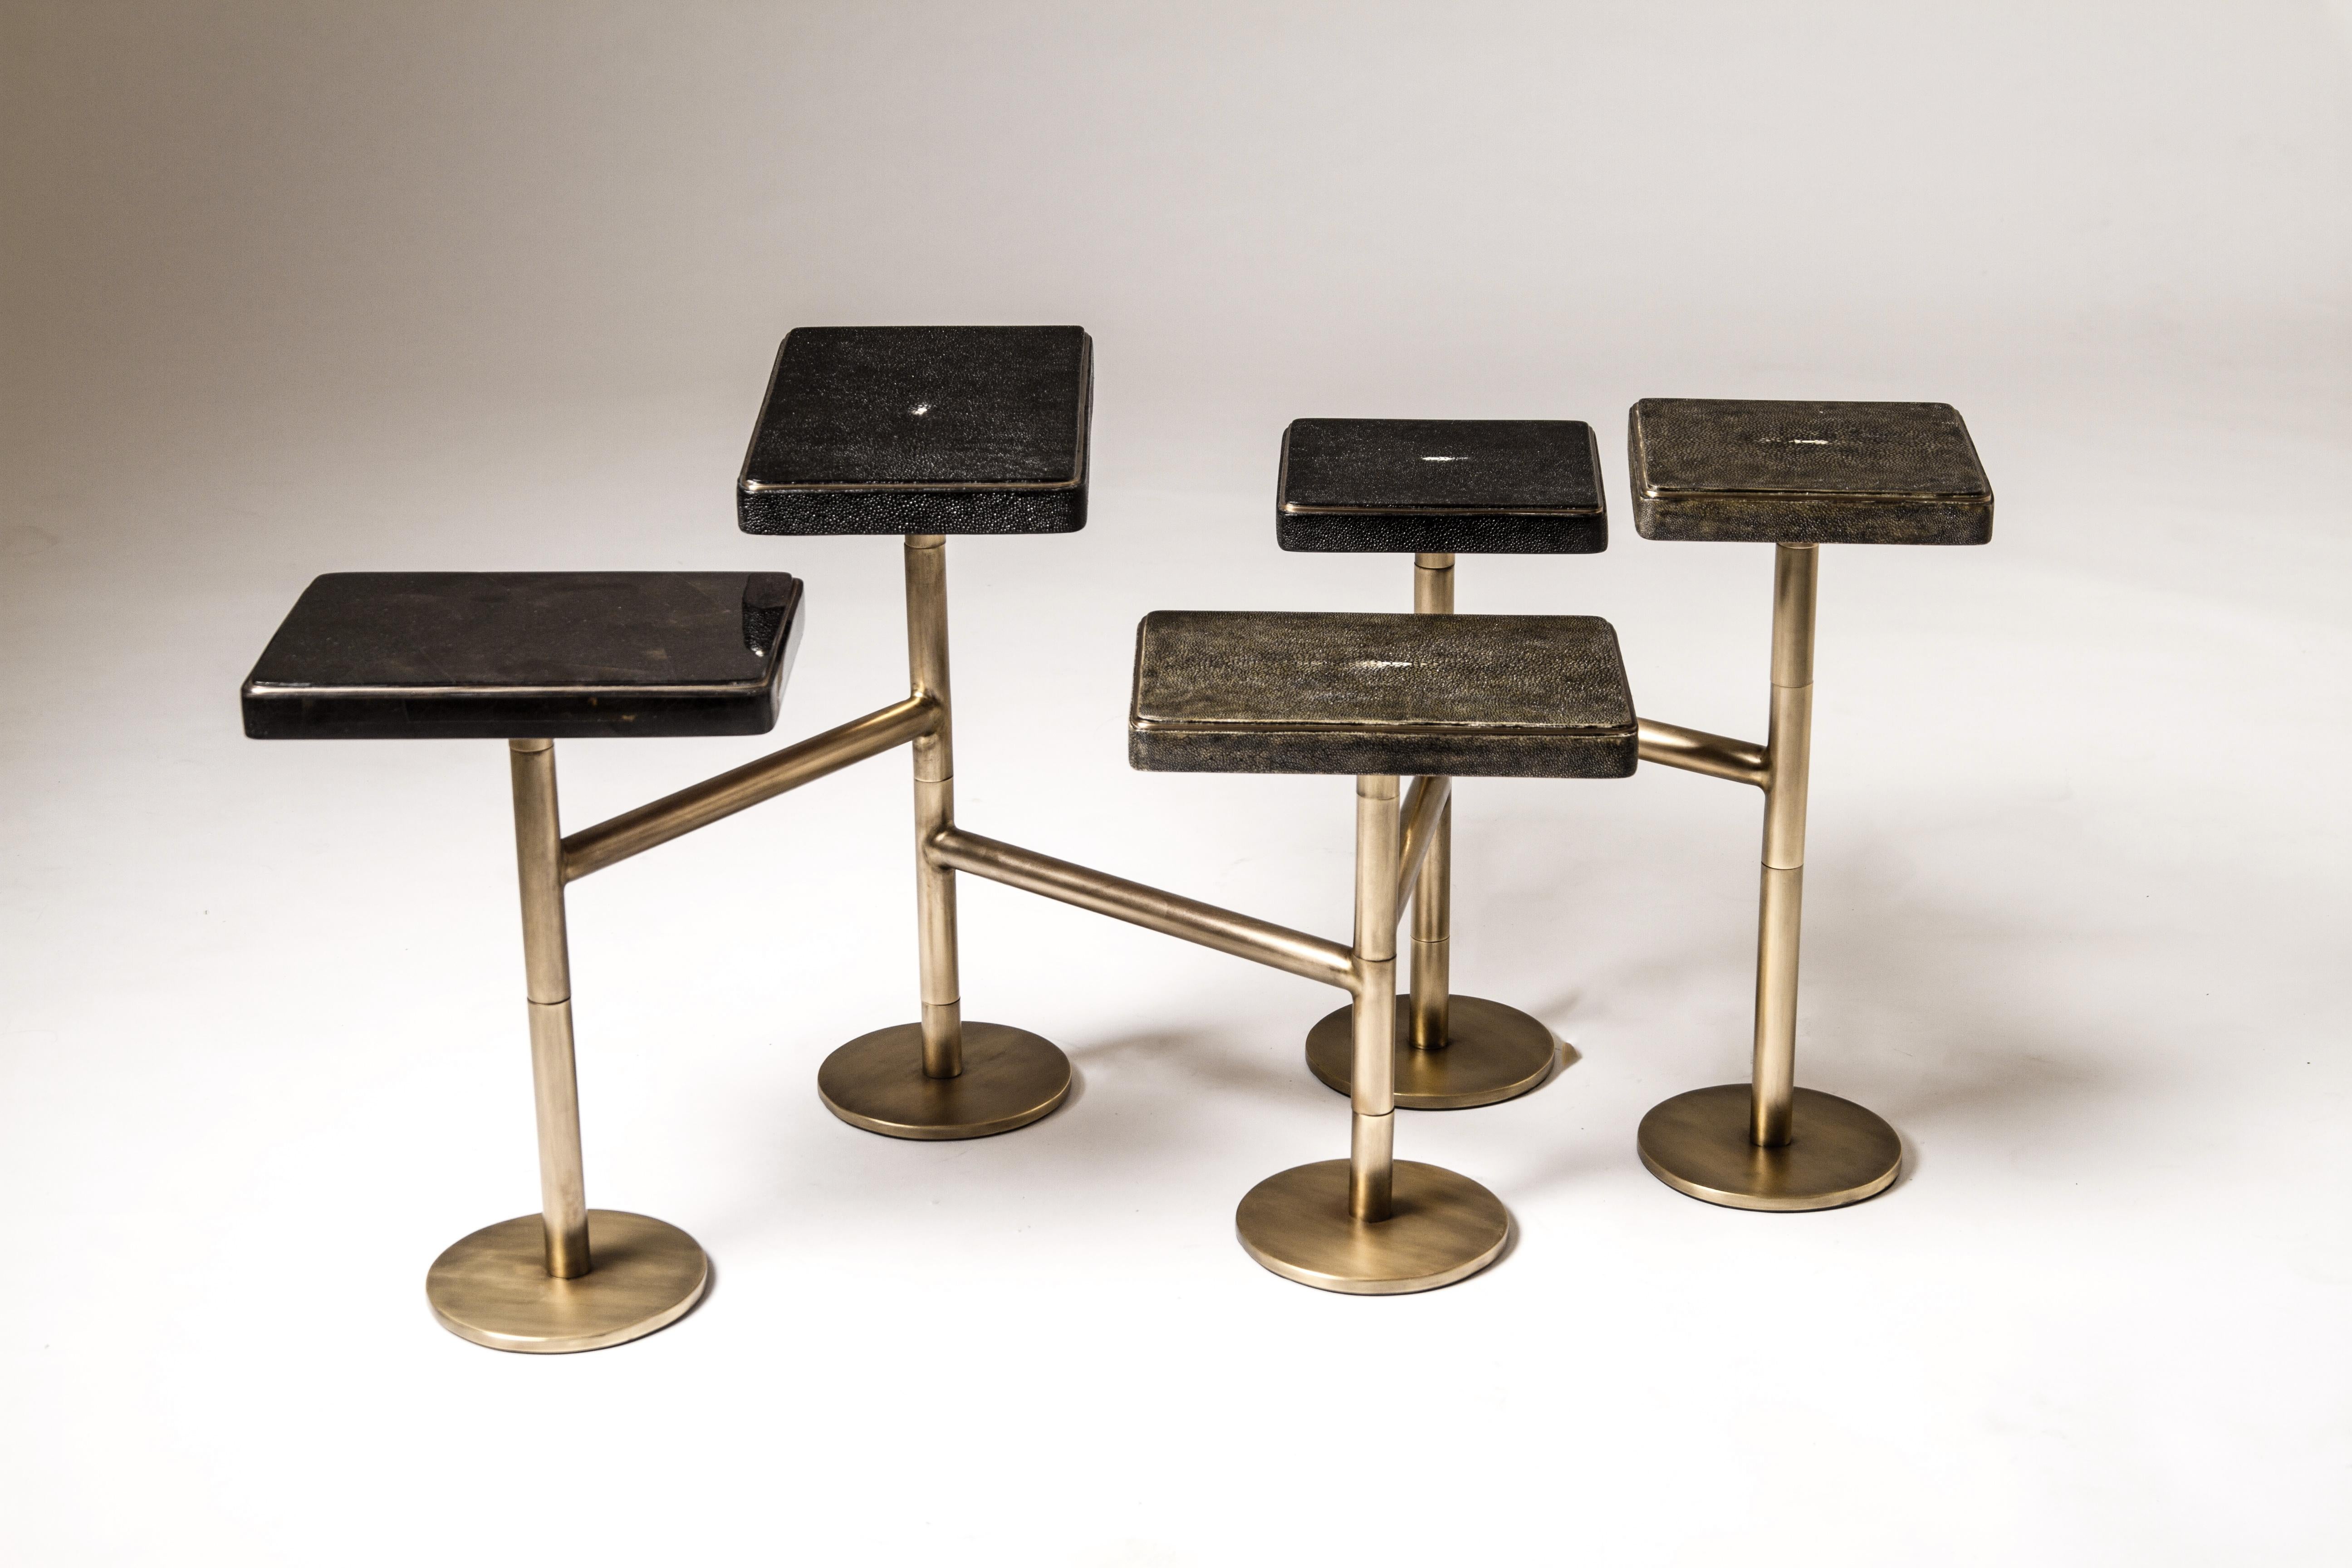 The 5-top rotating coffee table in antique black shagreen, jet black shagreen and black pen shell is completely mobile, allowing one to adjust the piece to their preference from elongated to clustered. The shagreen inlaid tops have a discreet metal